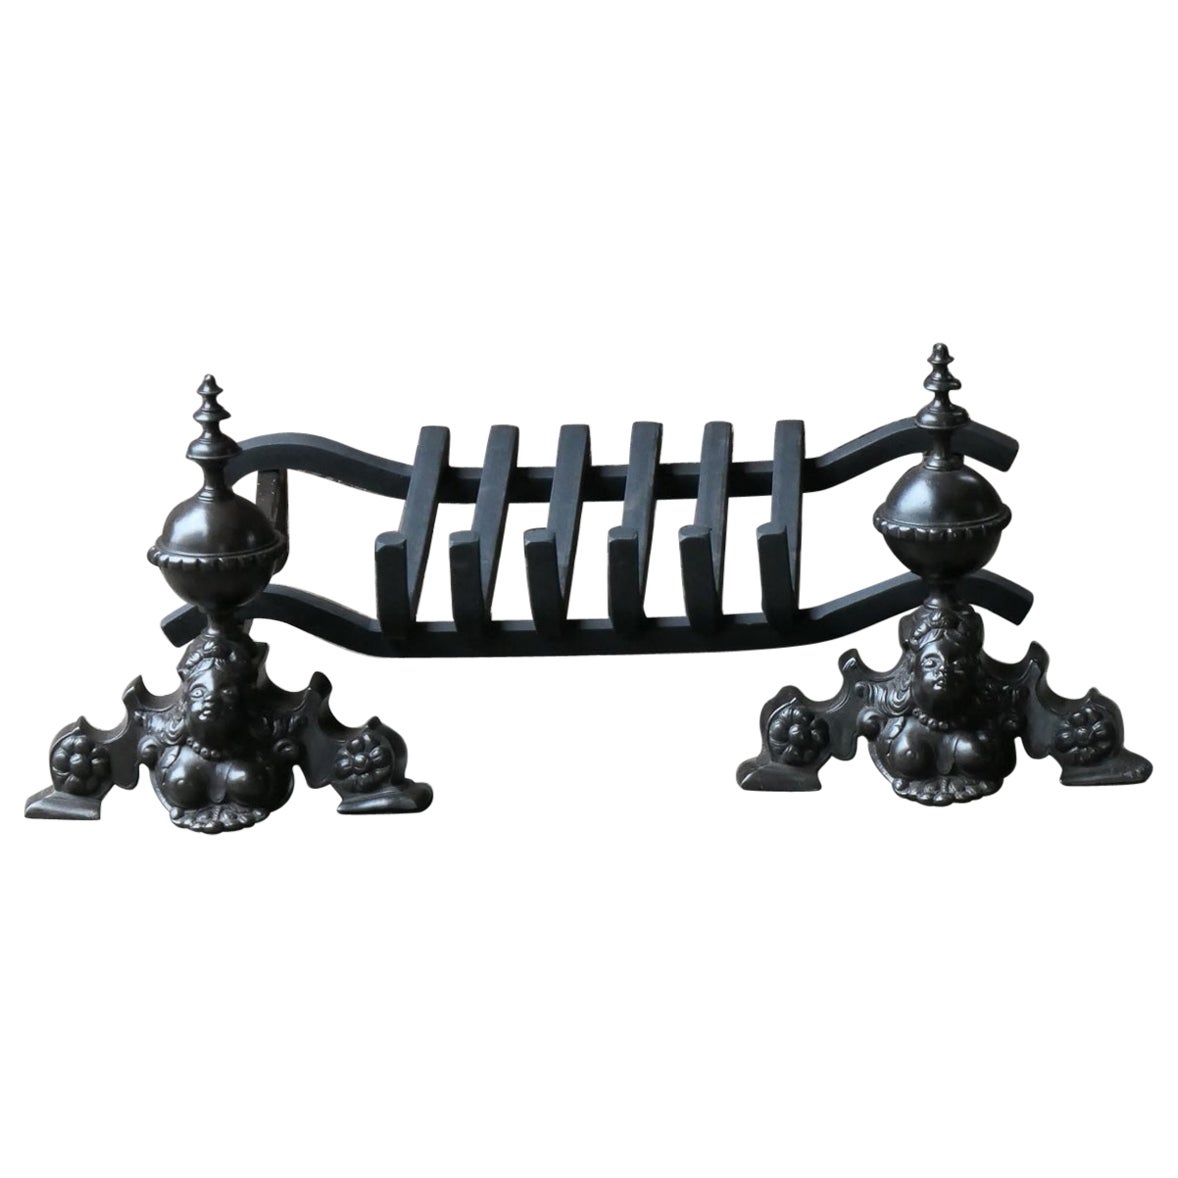 Antique French Louis XIV Fireplace Grate, 17th Century For Sale